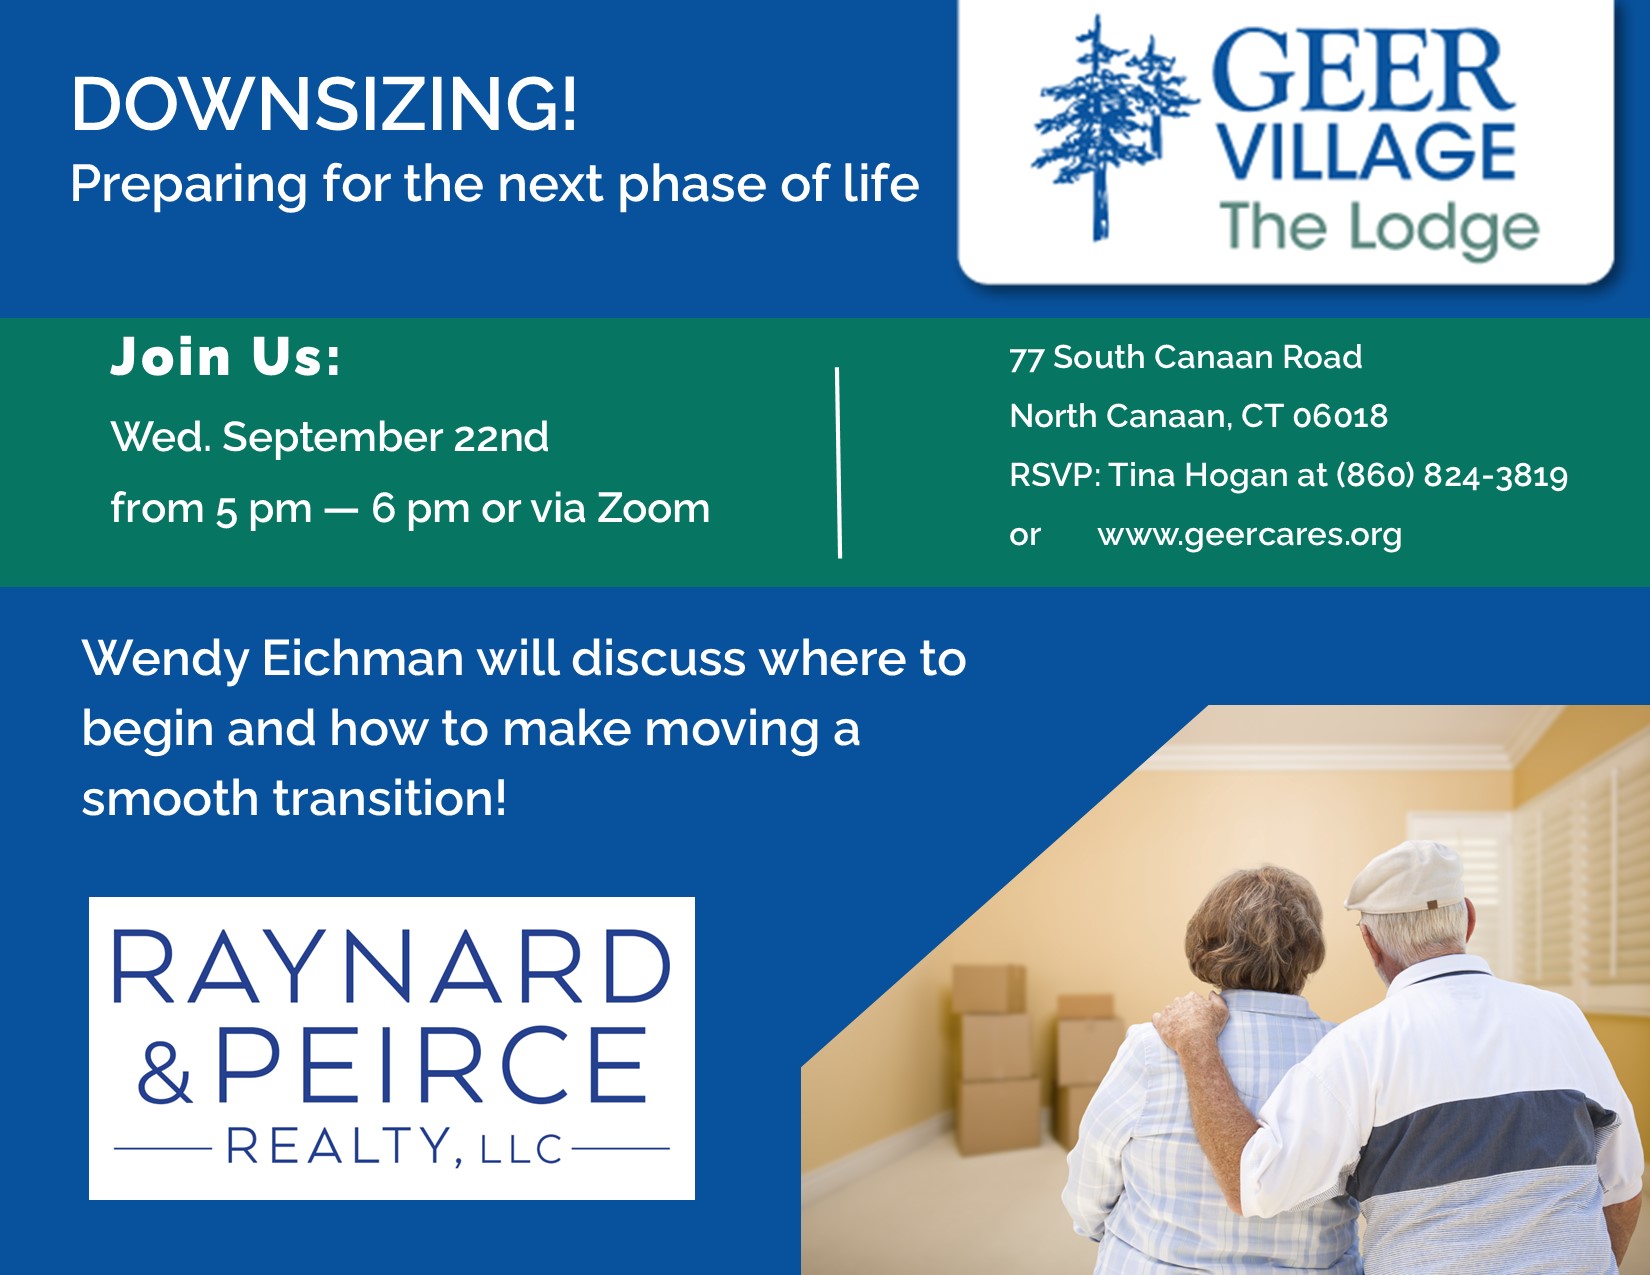 Downsizing event